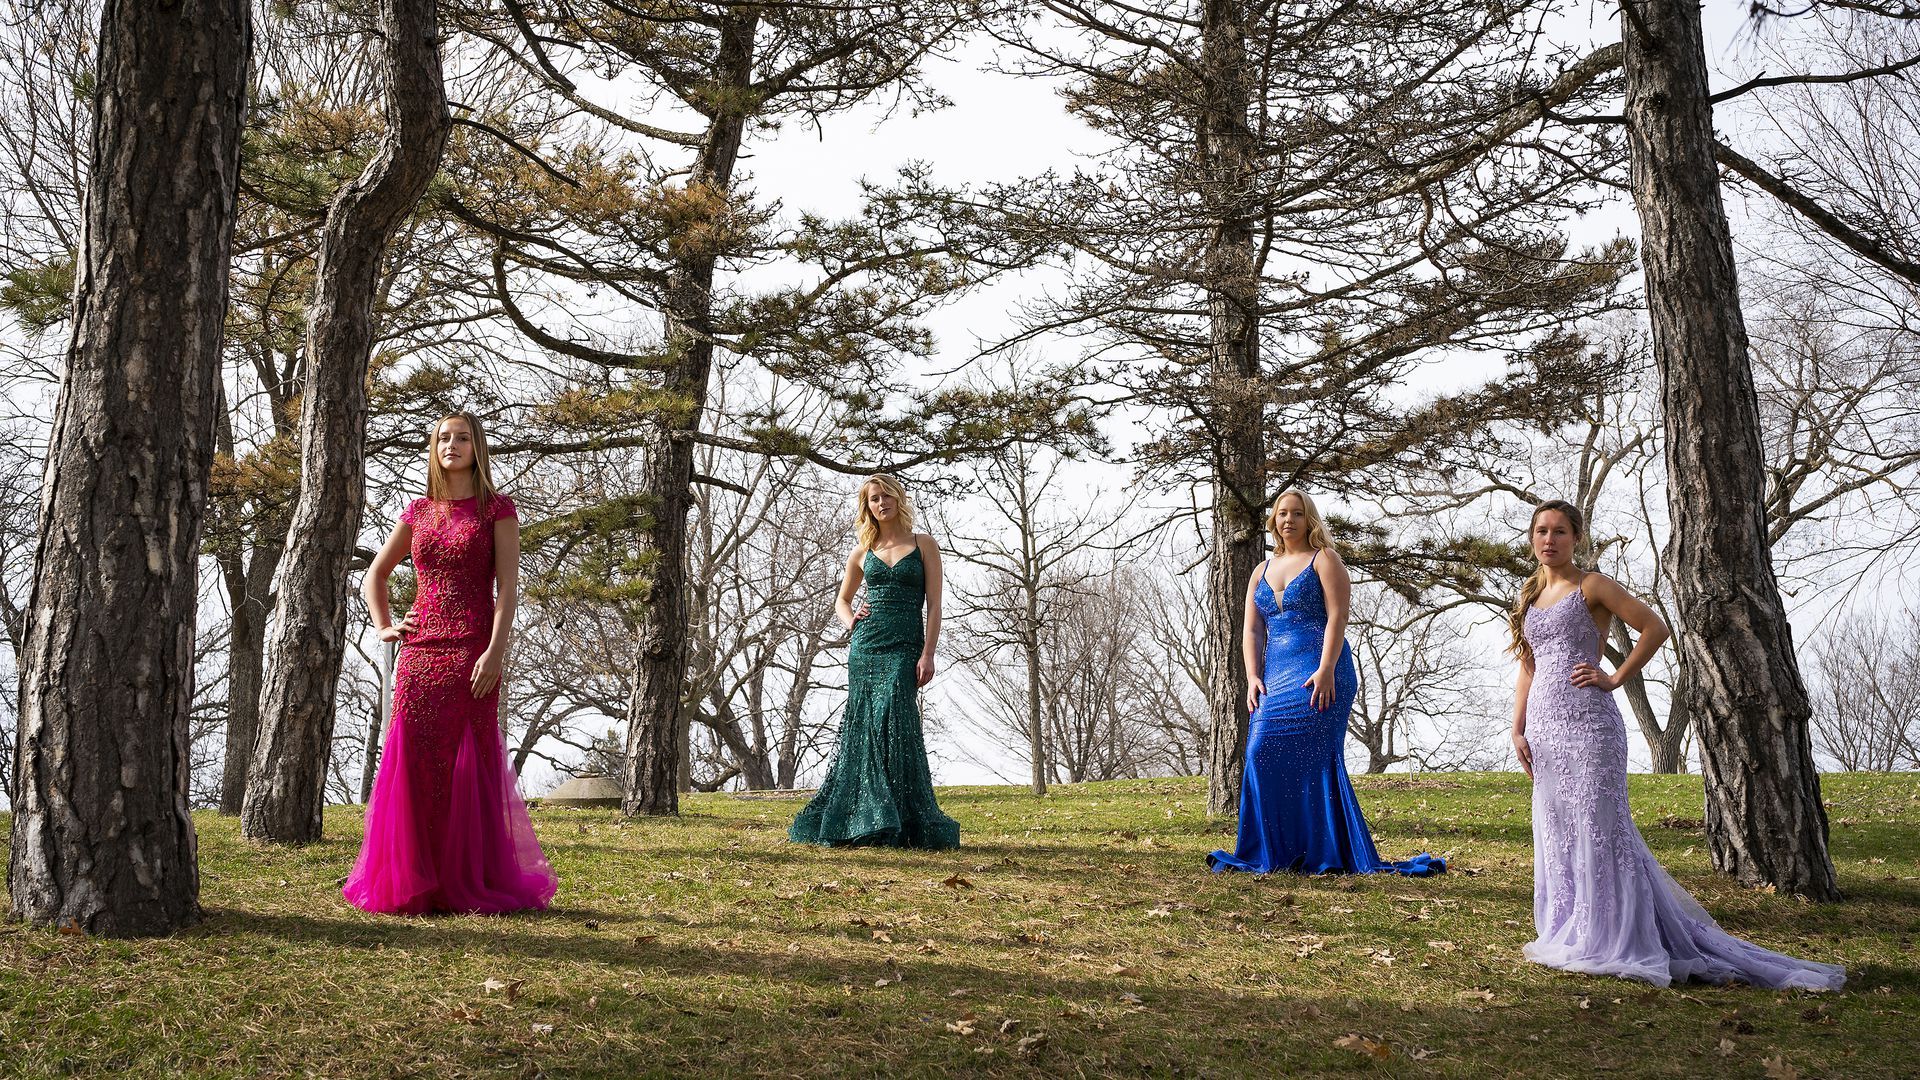 Seniors Madisyn Swanson, from left, Lily Marchant, Hannah Dorr and Morgan Brown posed for a photo in their prom dresses.